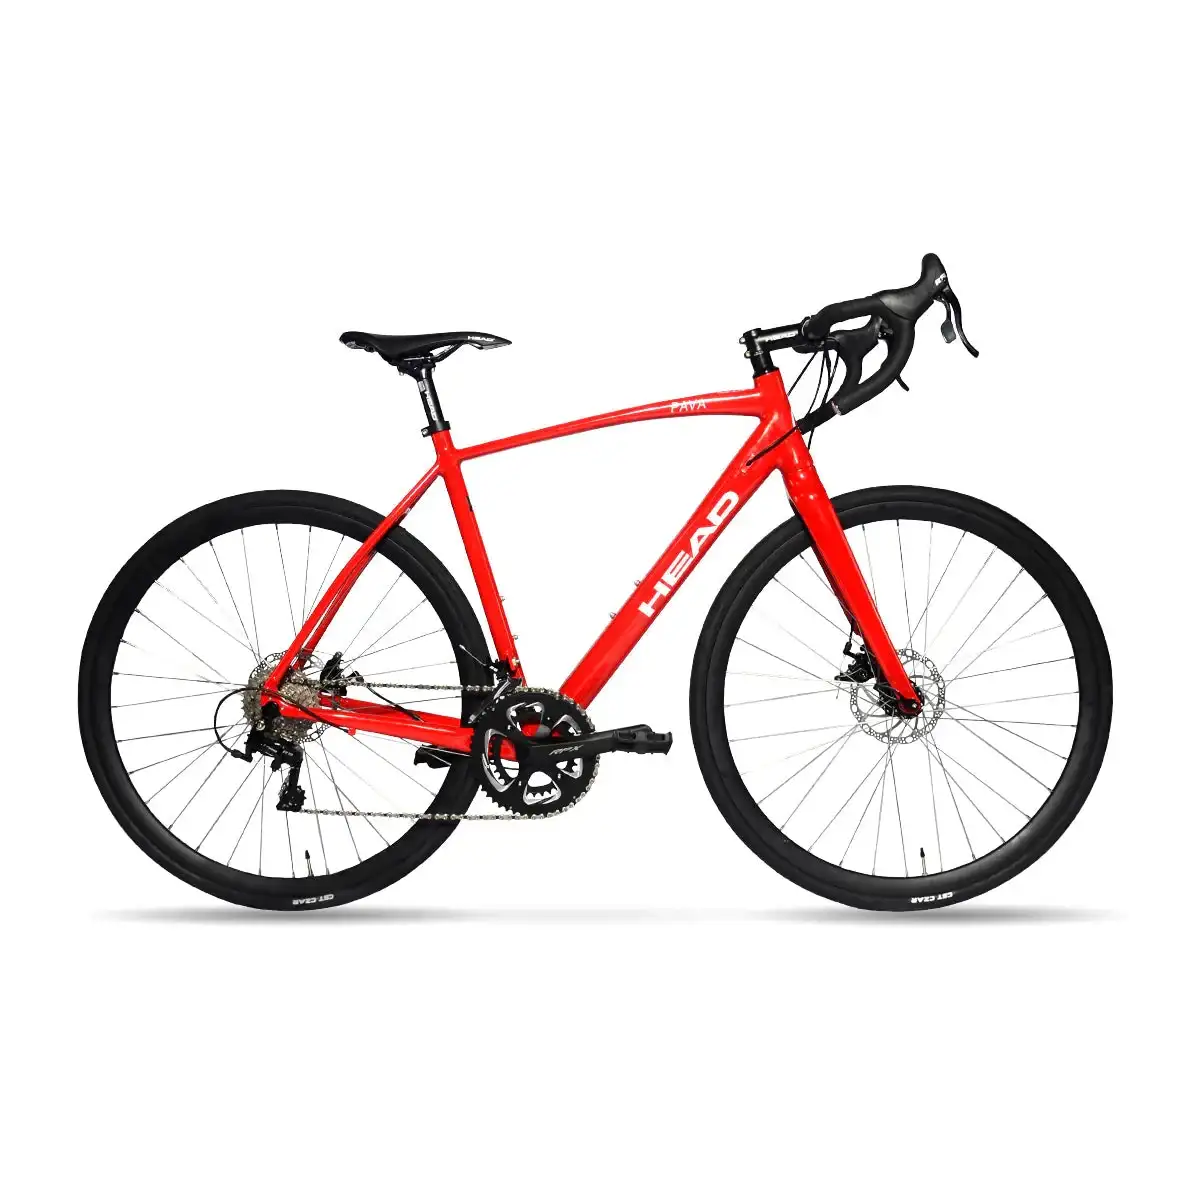 Image of Head Pava Alloy Road Bike - Red